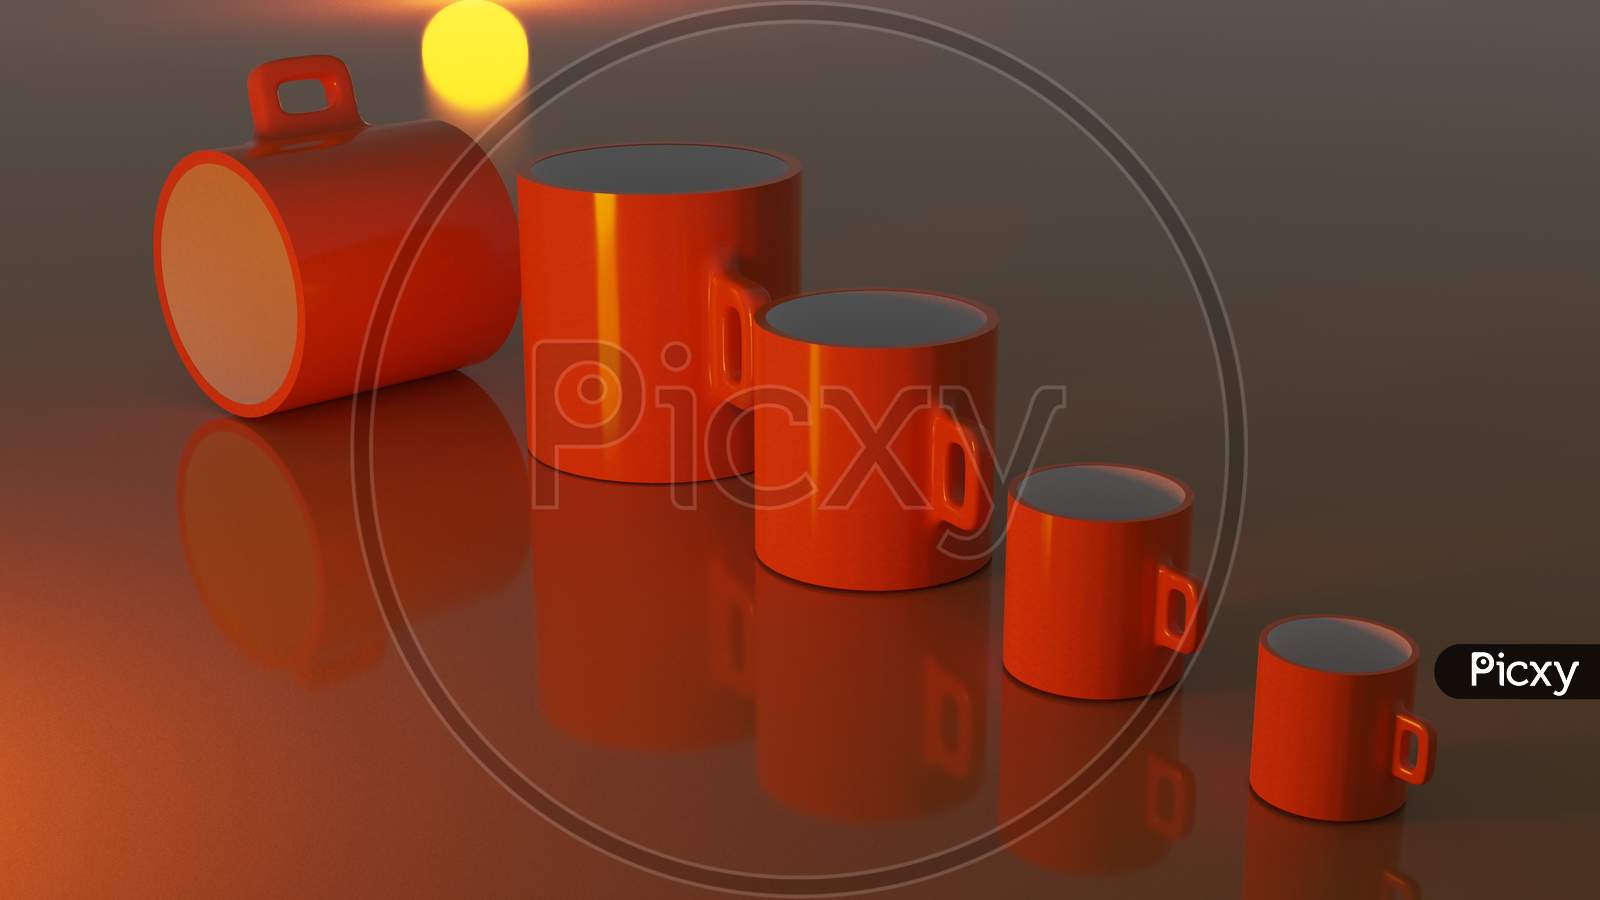 Five Orange Colored Coffee Cups Are Arranged In Incrementing Order